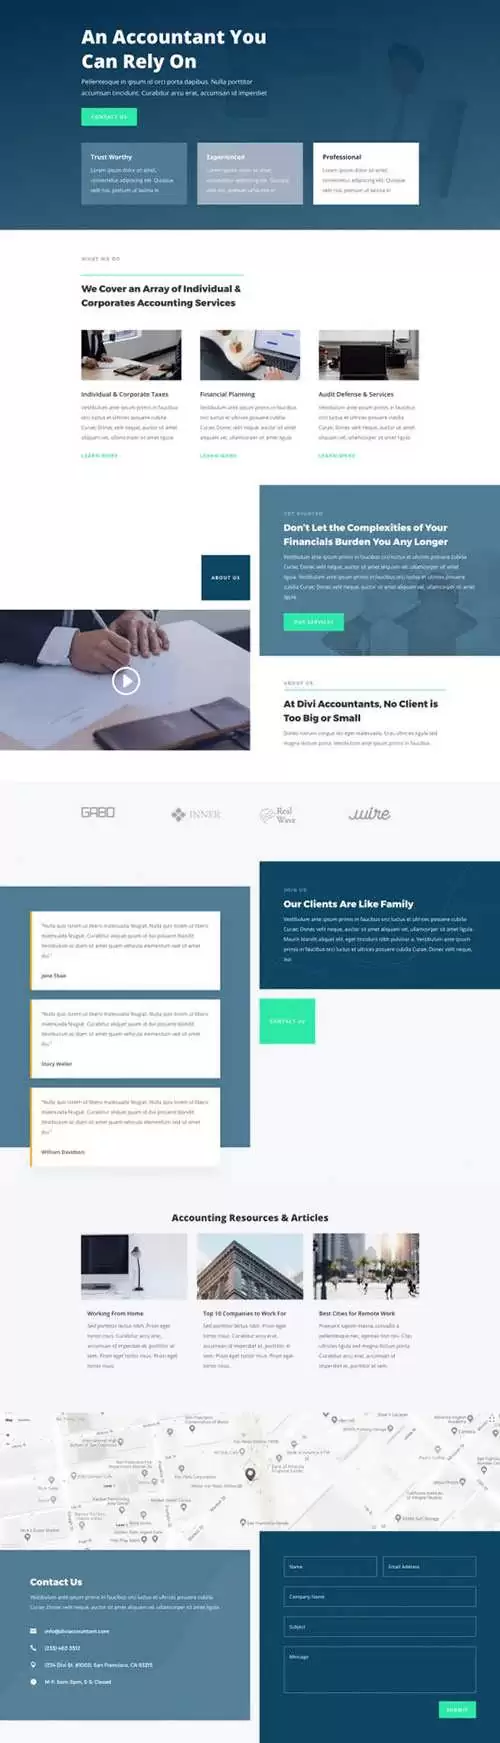 accountant landing page